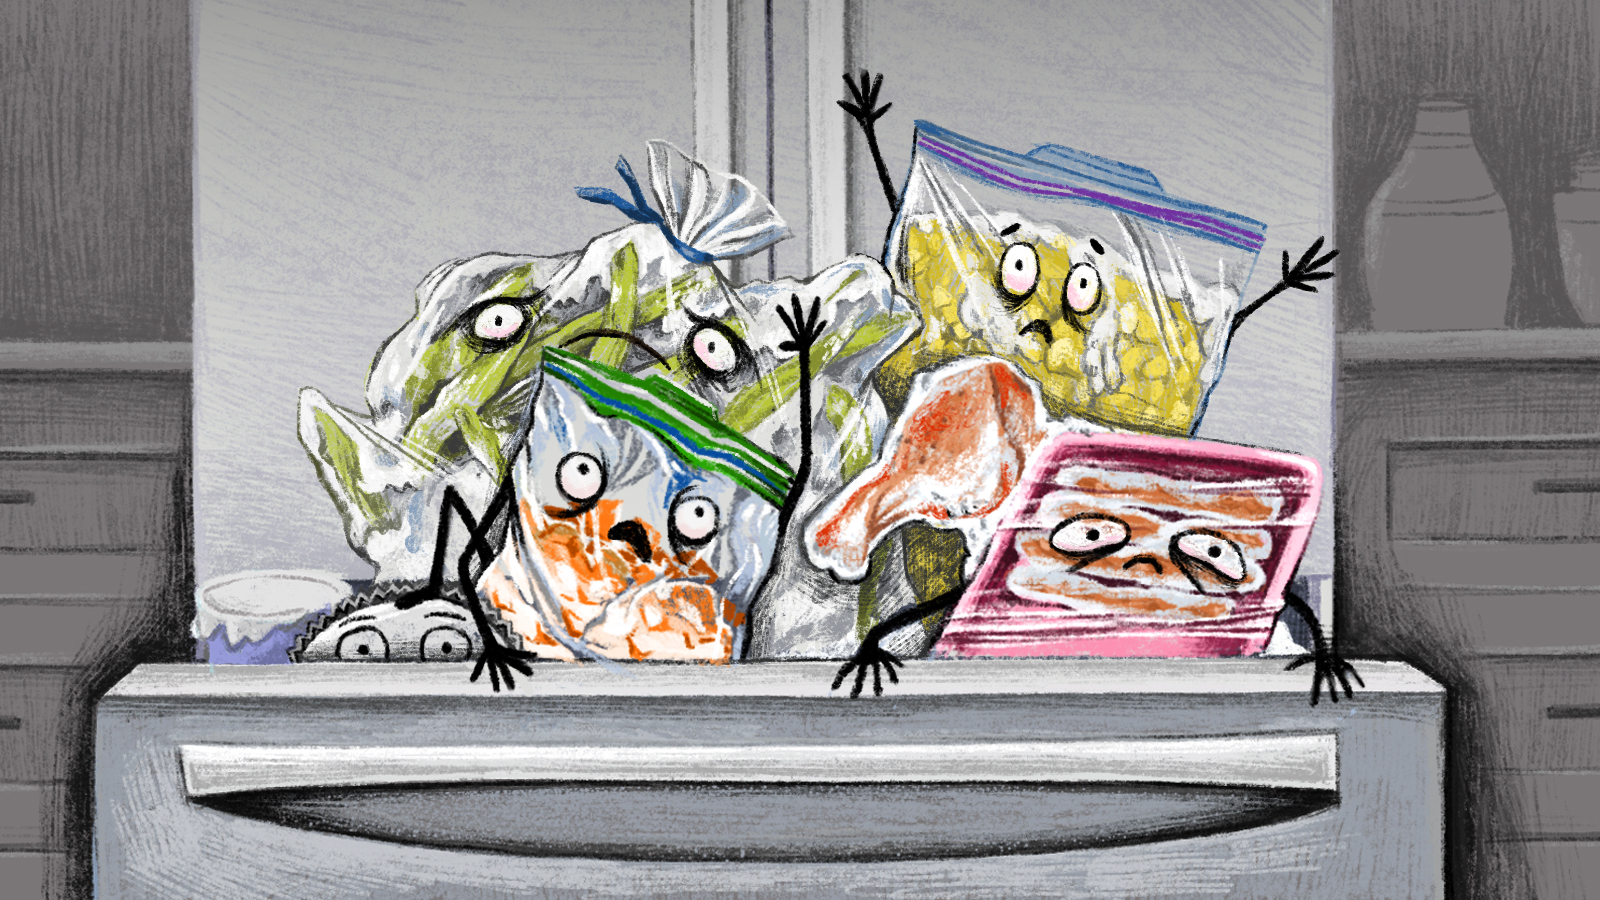 Anthropomorphized bags and containers of old food crawling zombie-like out of the freezer. Illustration.